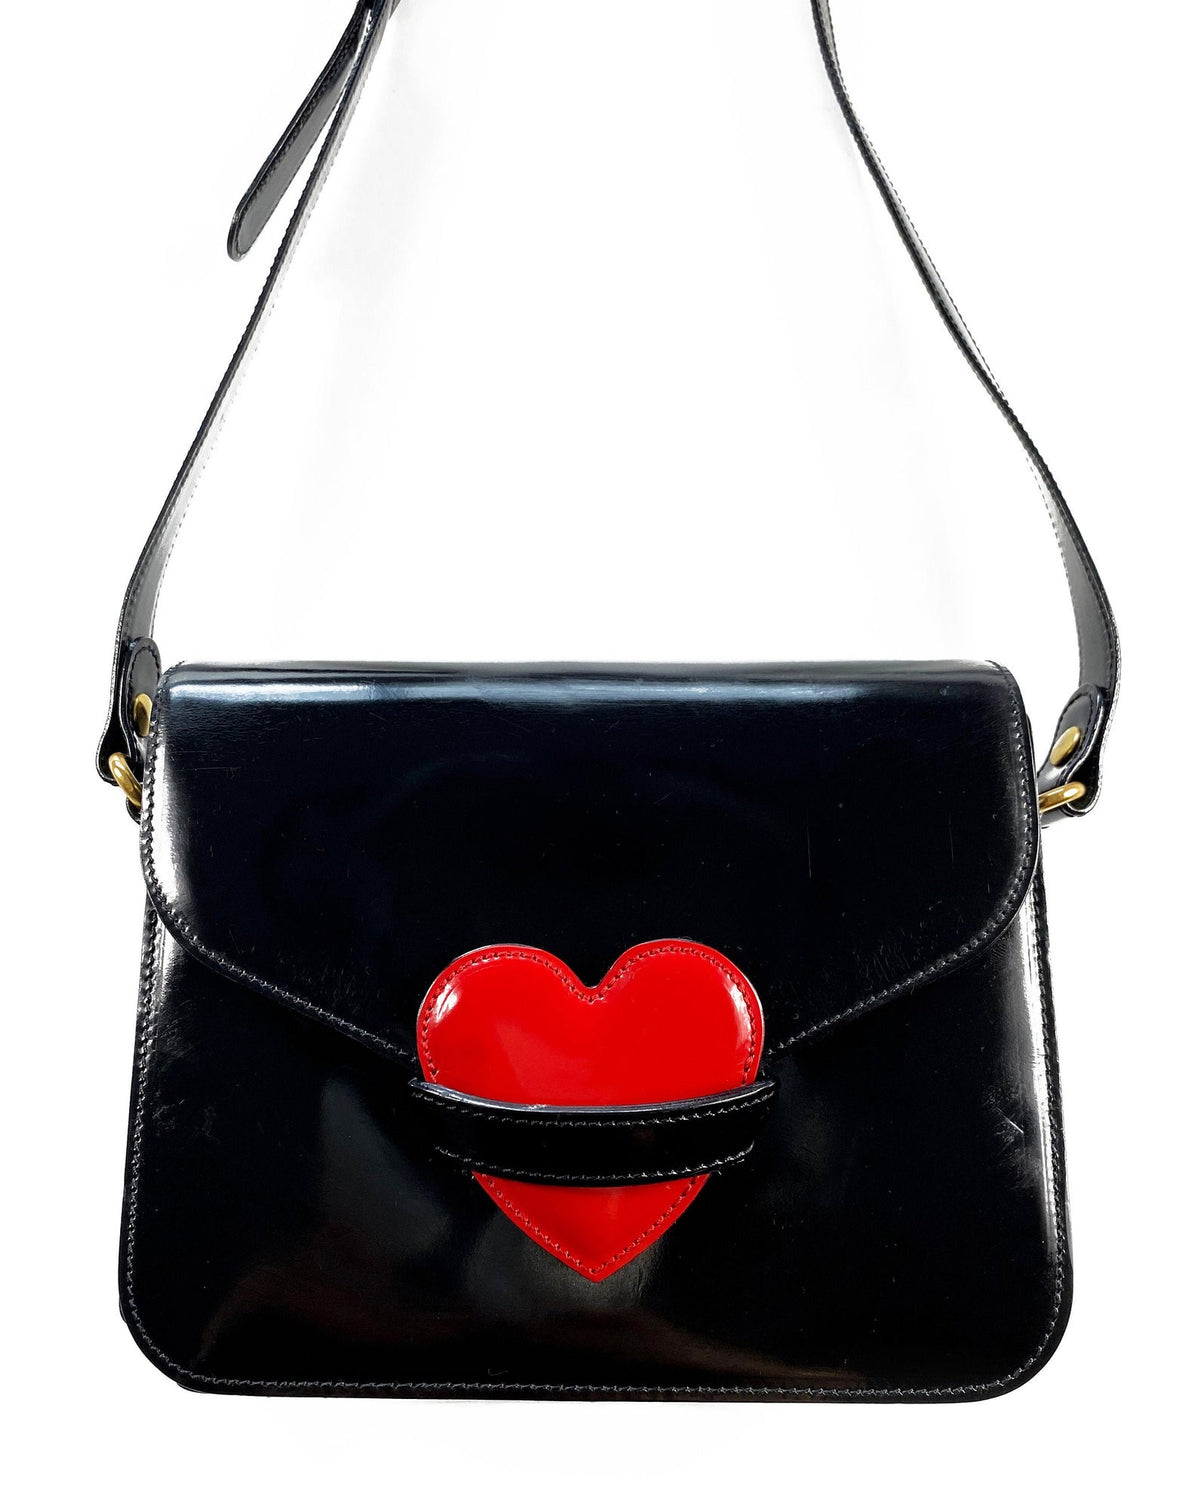 FRUIT Vintage rare Moschino heart cross body handbag in a classic satchel shape. Features an internal zipper pocket, Moschino logo lining, magnetic button front closure, Moschino Redwall authenticity stamp and logo plaque at side.